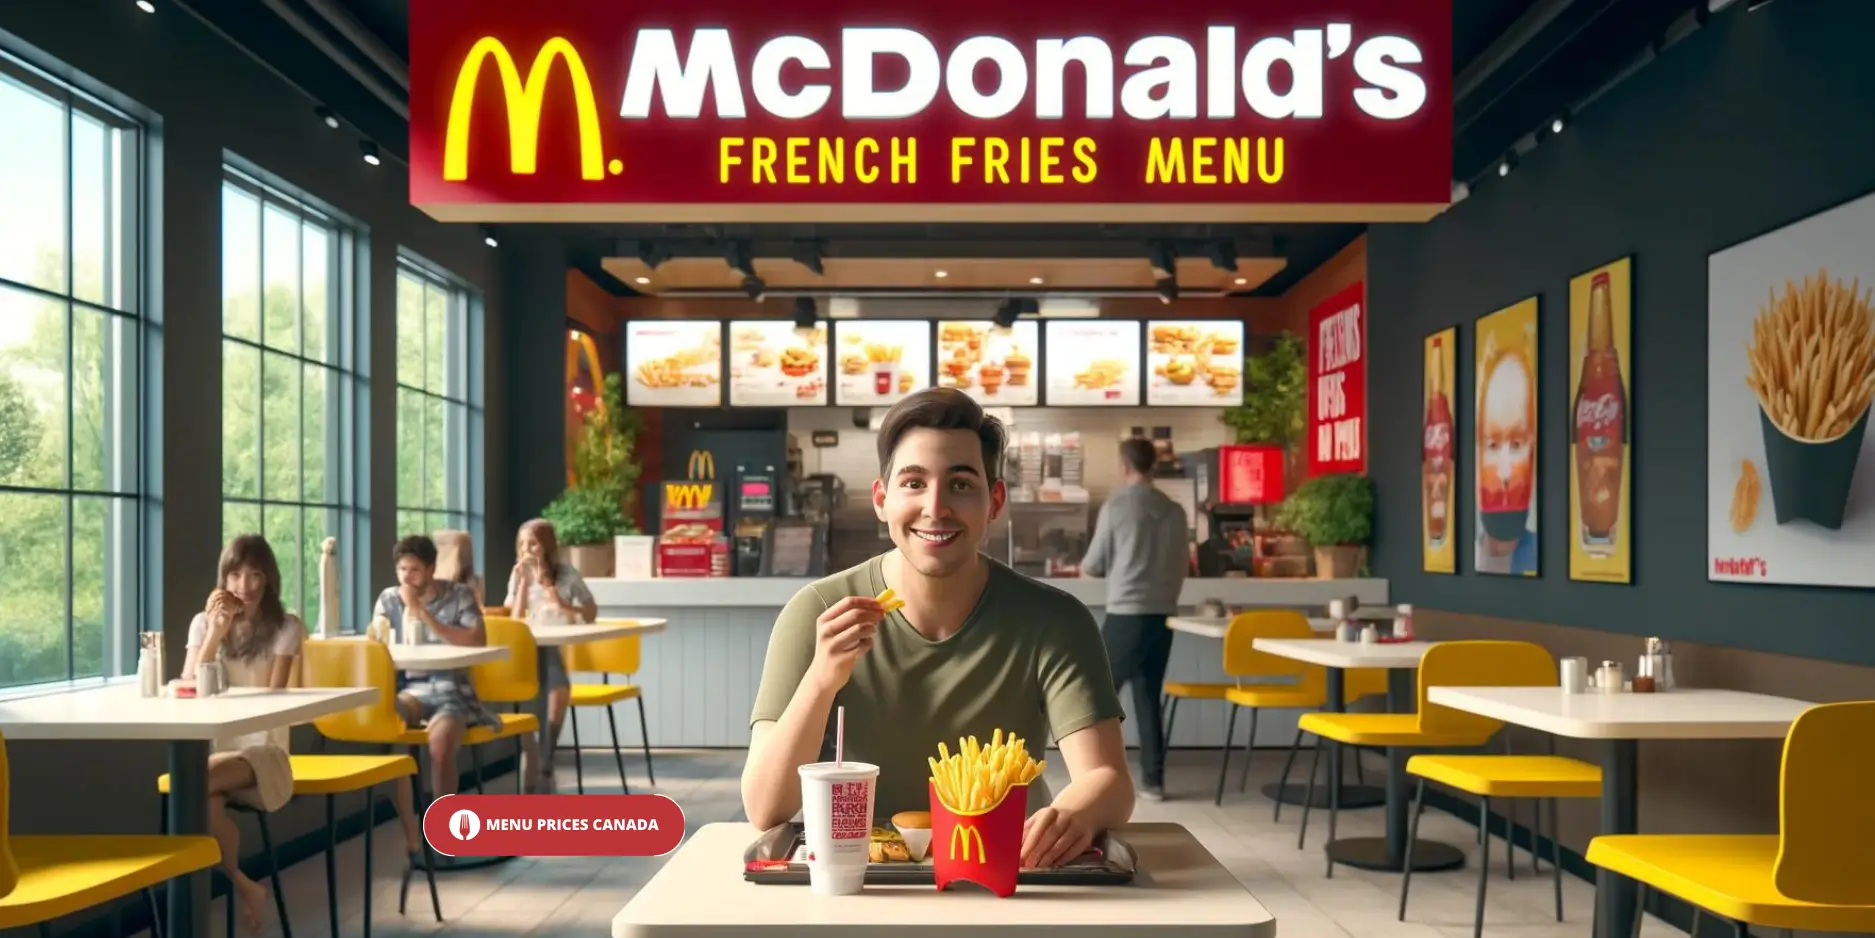 Mcdonald's-French-Fries-Menu-with-prices-Canada